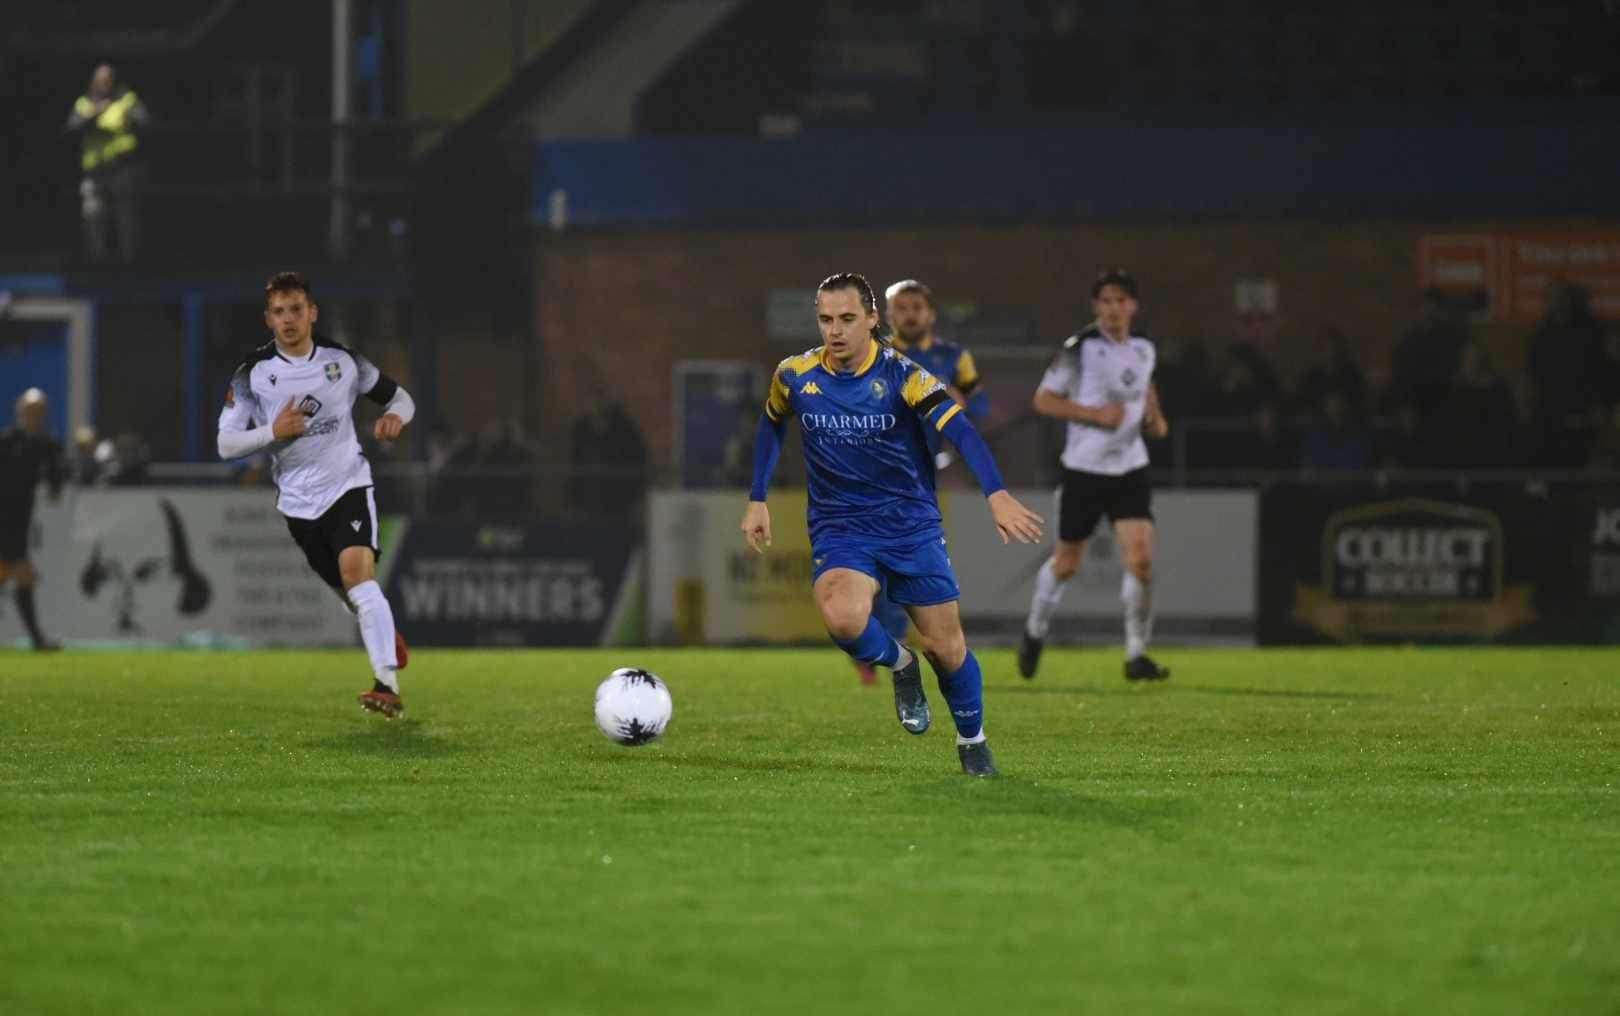 Ben Stephens with the ball during tonight's game between Lynn and Bishop's Stortford